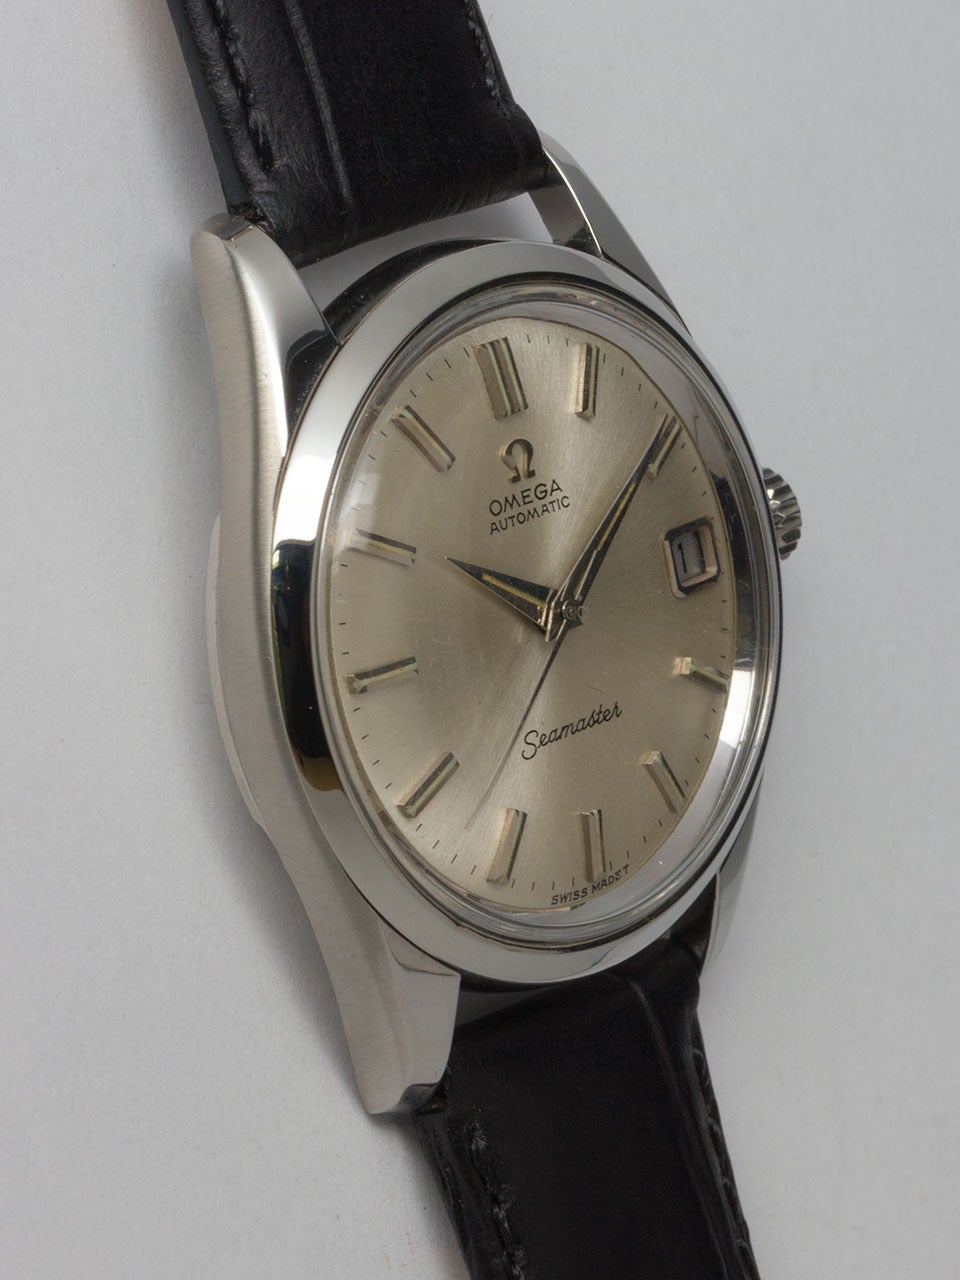 Omega Stainless Steel Seamaster Wristwatch ref 1660110-67 serial #26.9 million circa 1968. 35 x 44 case wide smooth bezel, screw down case back, deeply die struck Seamonster logo. Original matte silvered dial with applied silver indexes, applied